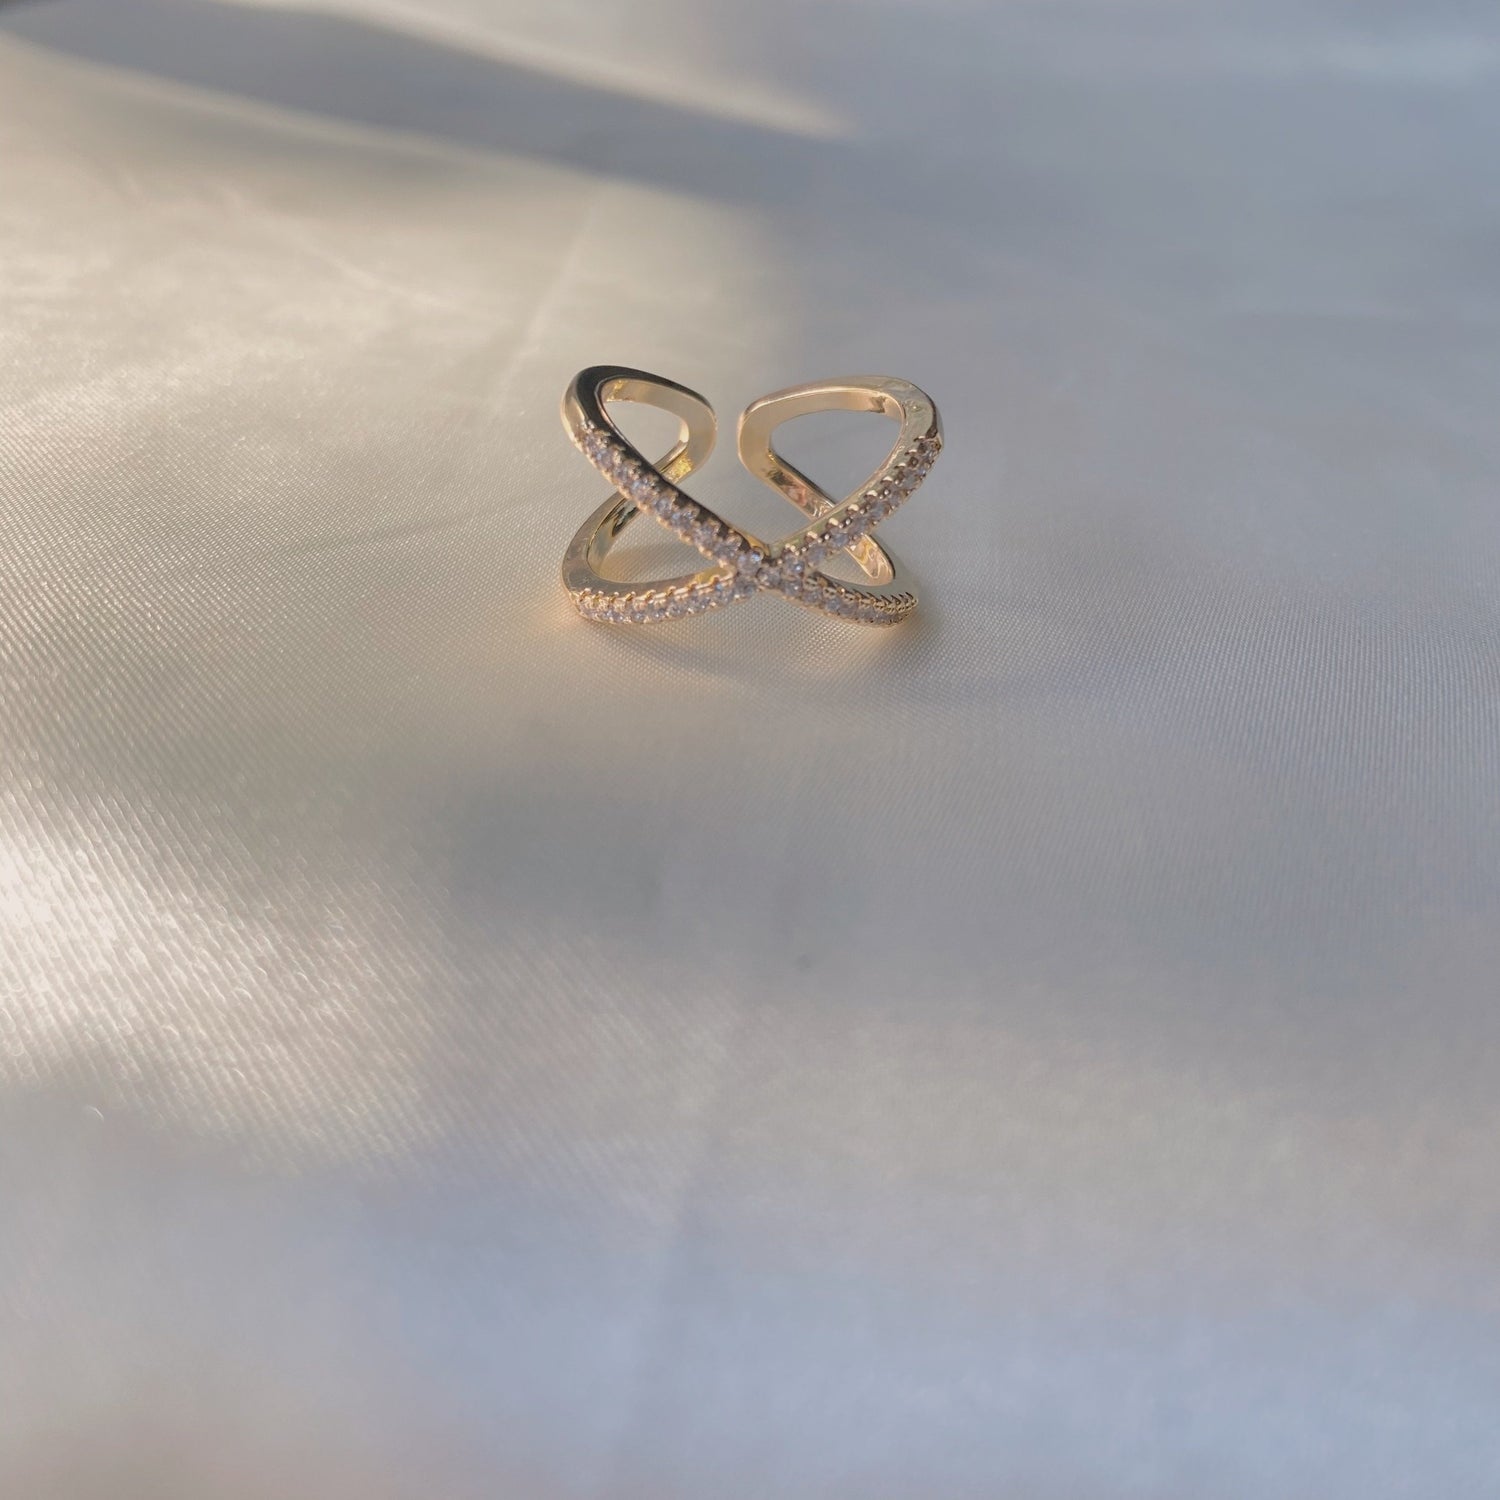 Adjustable X-shaped gold-plated & zirconia ring